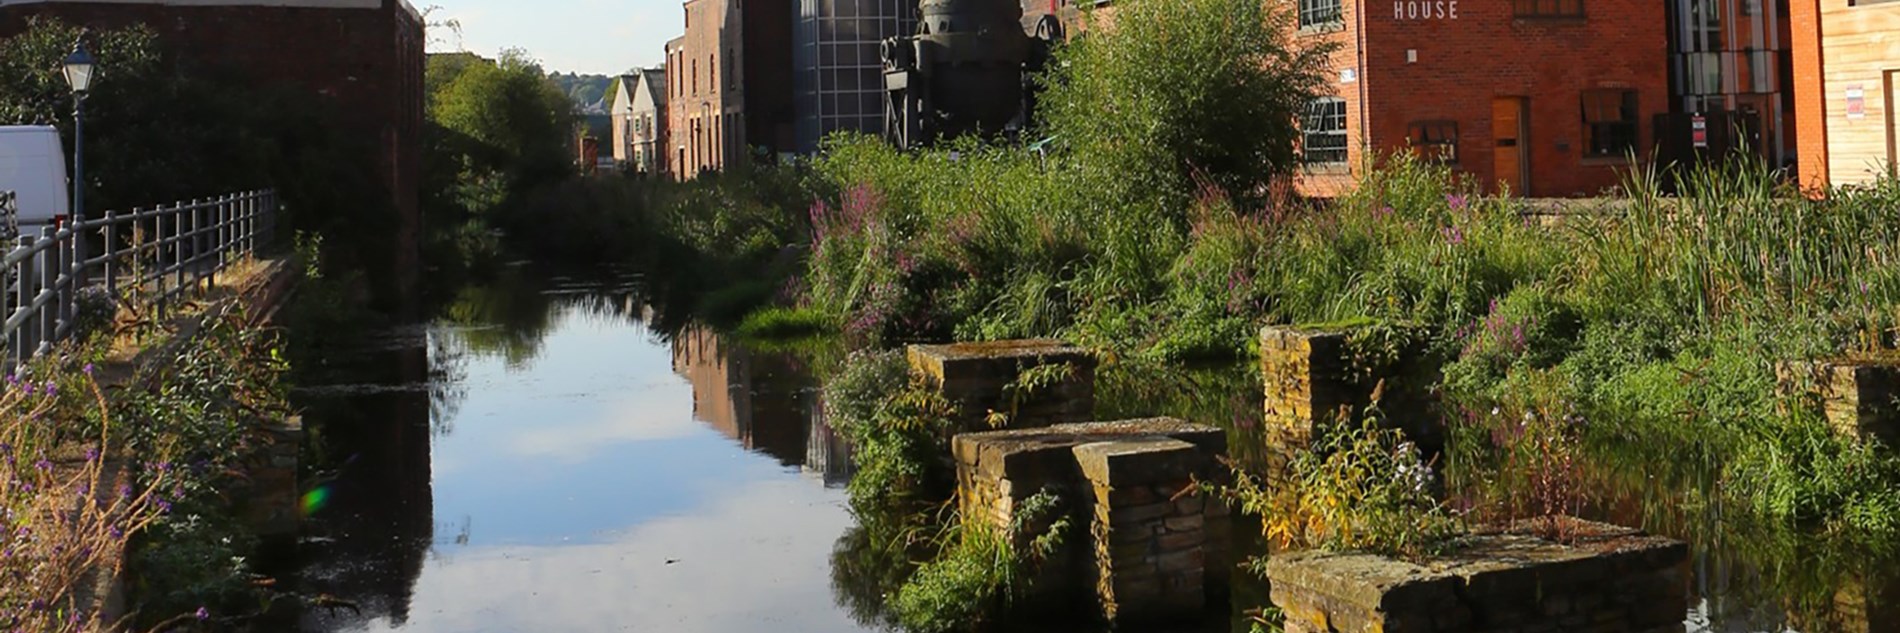 Photograph of a man-made water channel with greenery growing on the banks. To the side are red-bricked industrial buildings.